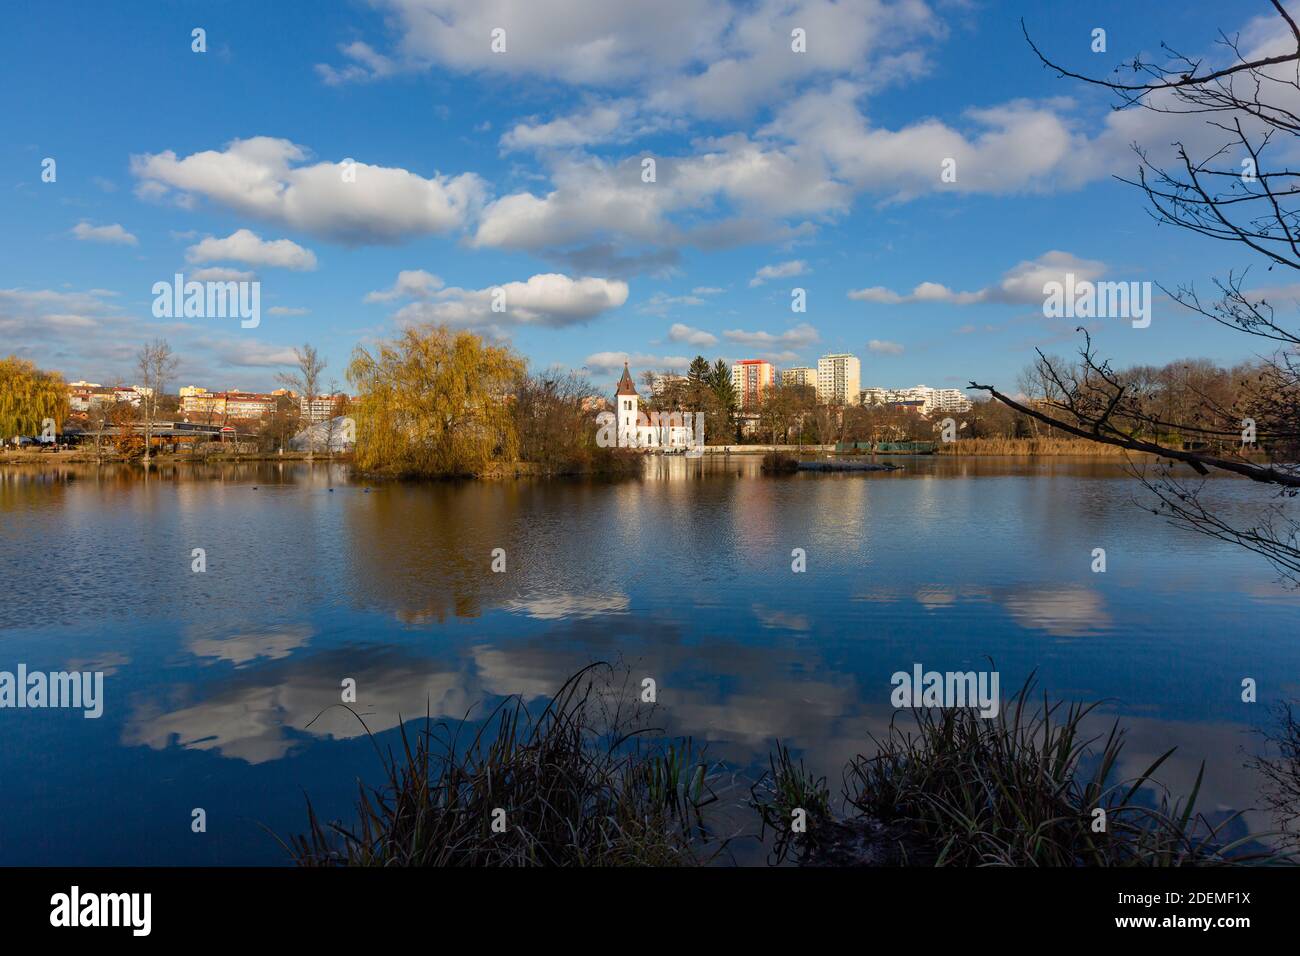 Prauge, Czech Republic - November 30 2020: View of the Hamersky pond and church of Nativity of Mary and houses over the water with reflection in water. Stock Photo